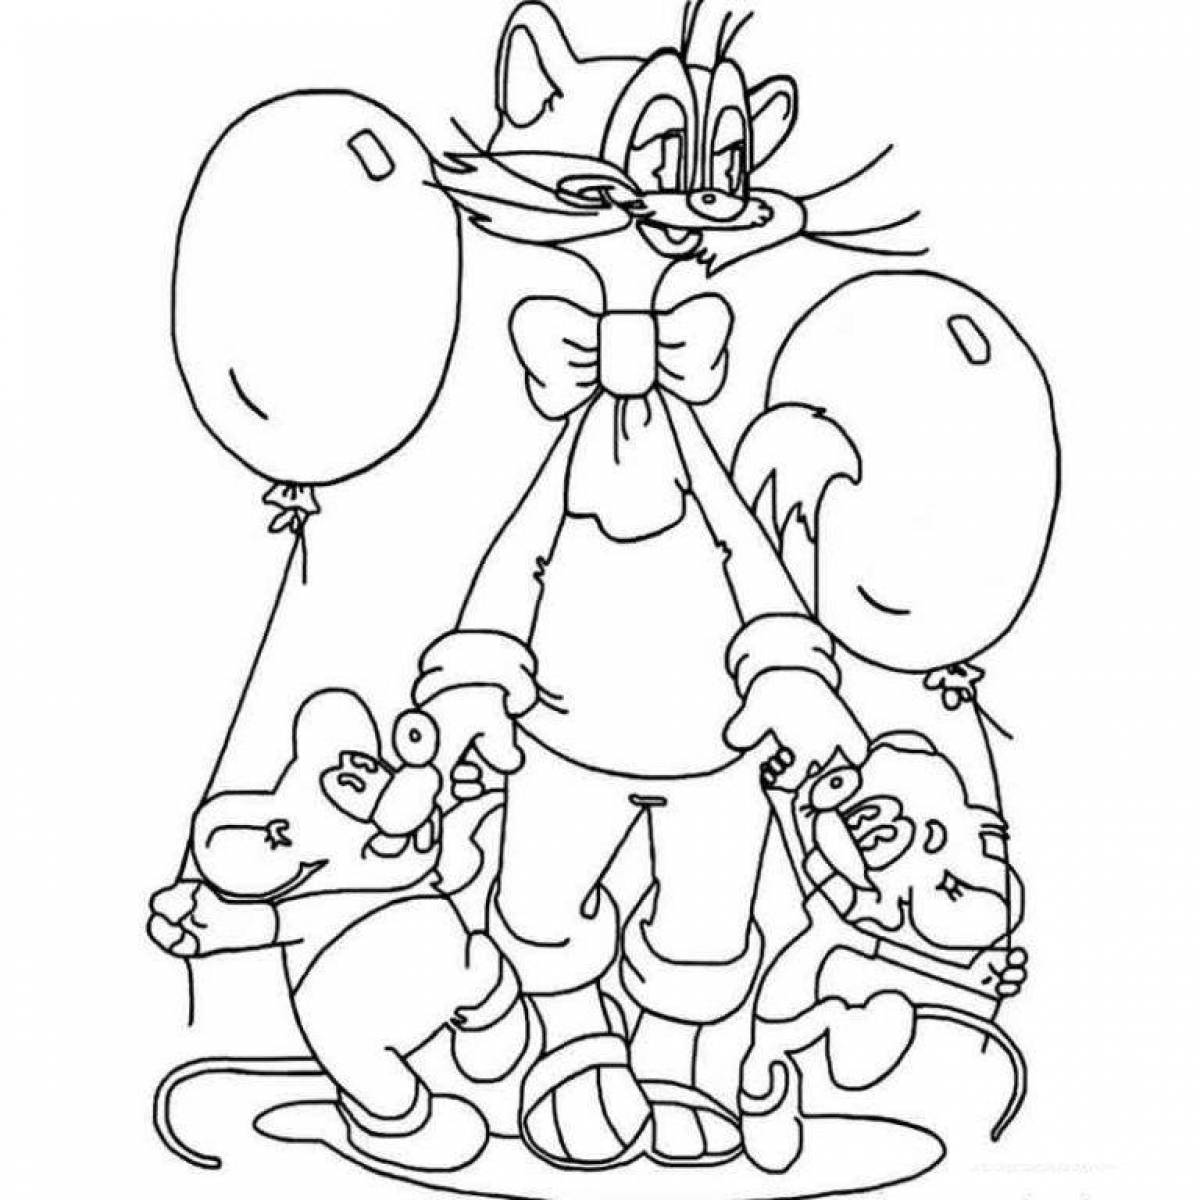 Coloring page bright 2nd grade